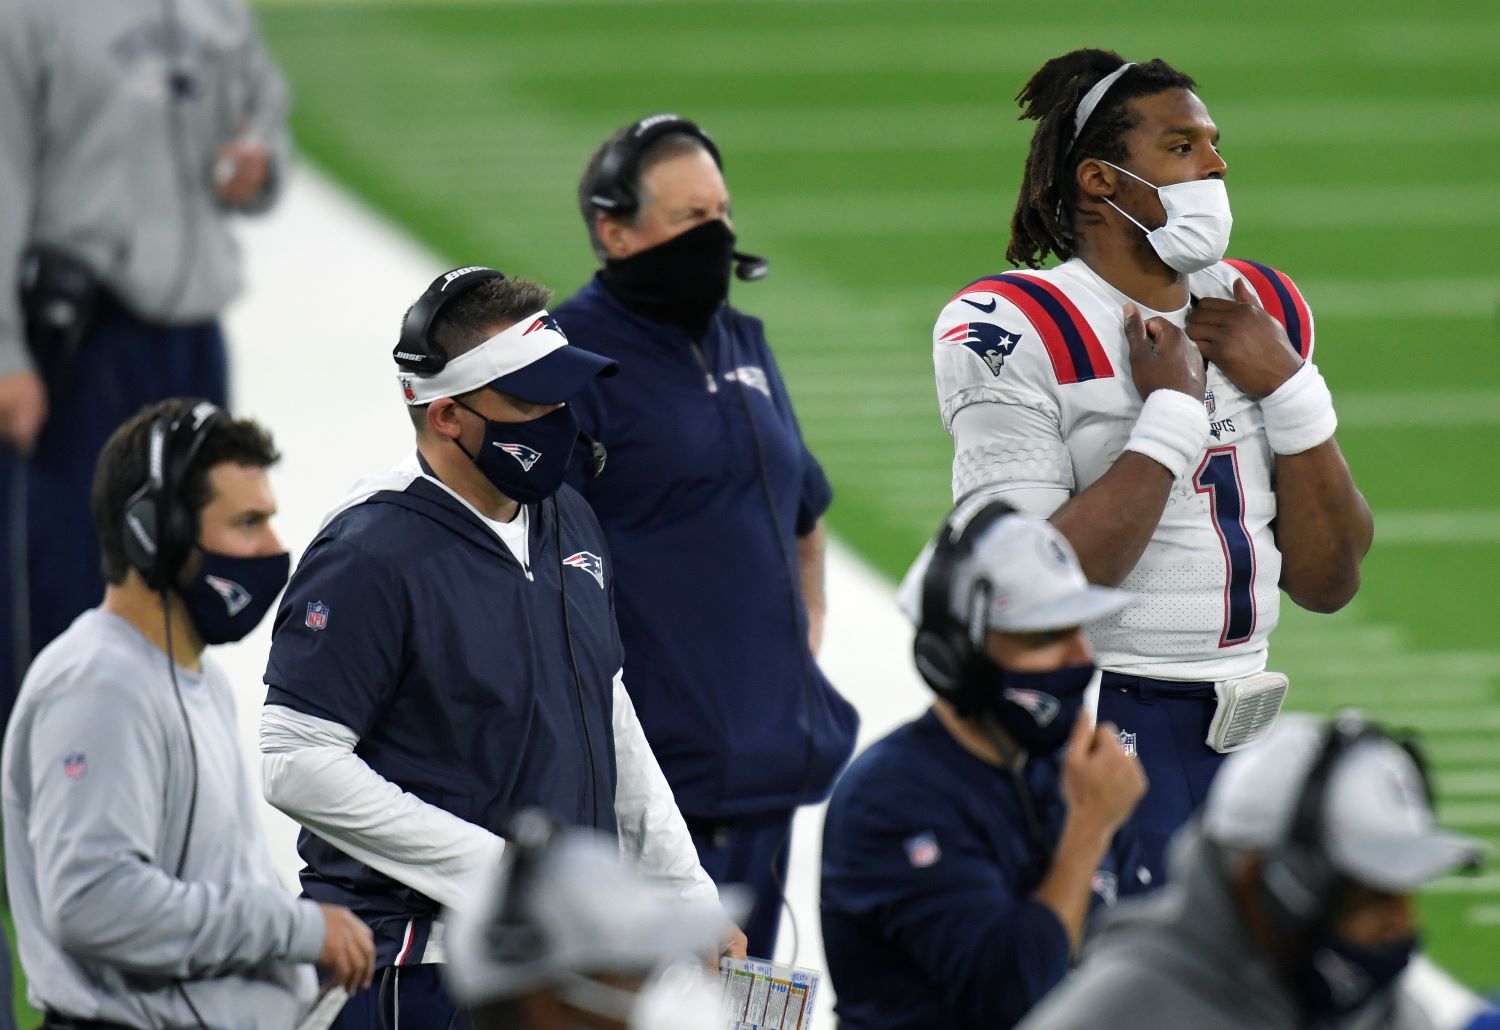 Bill Belichick has cost Cam Newton a shot at $1 million by failing to surround him with enough talent, which has left the Patriots in a position to miss the playoffs for the first time since 2008.